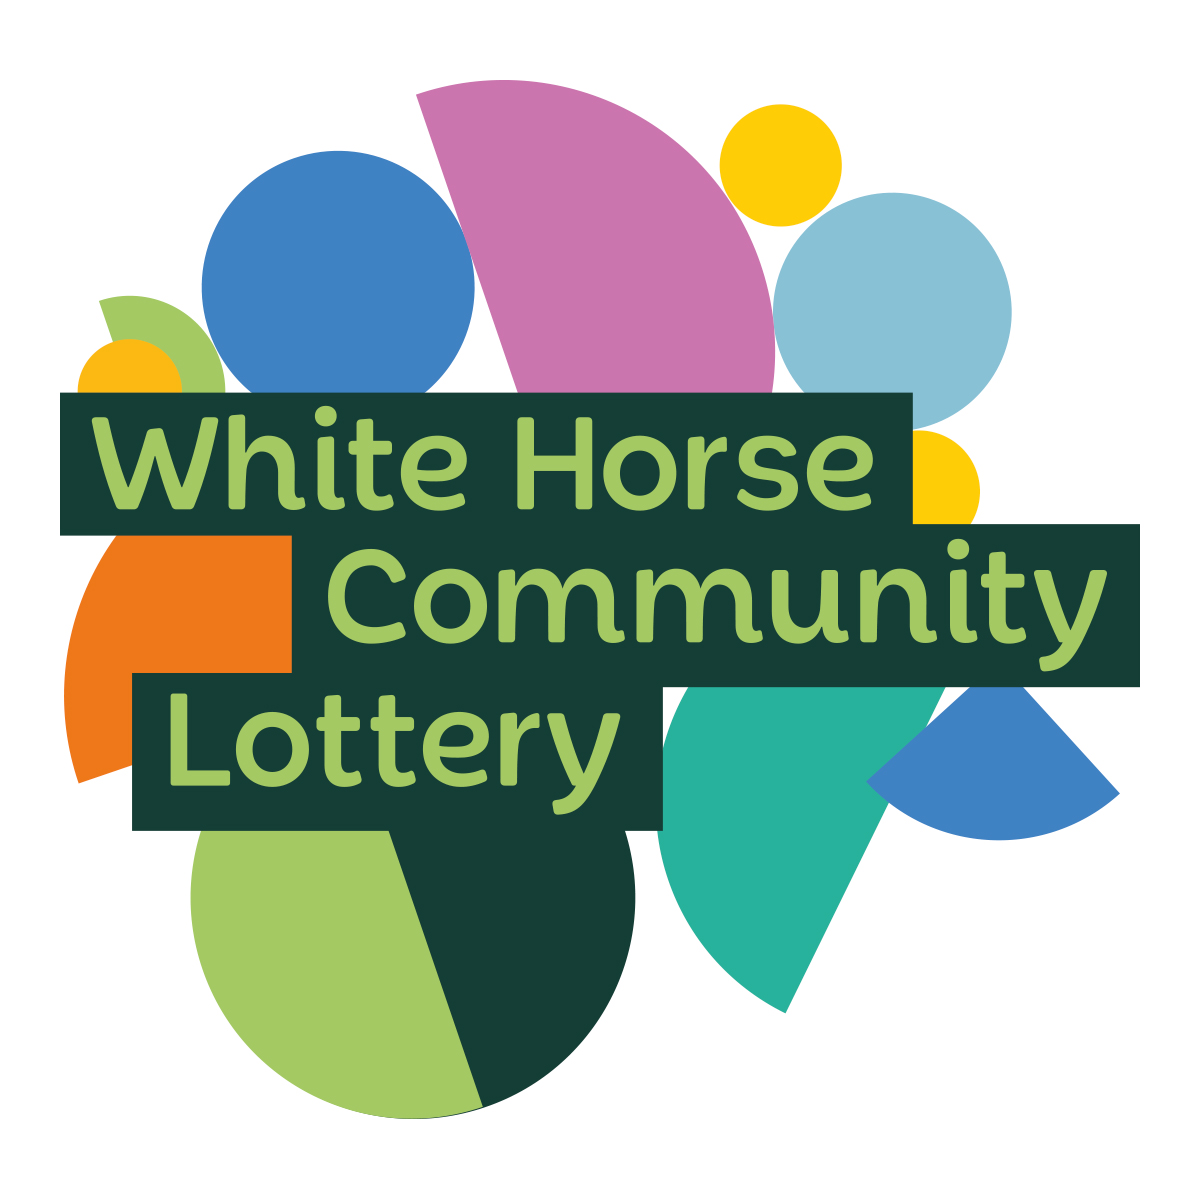 The White Horse Community lottery logo. The text is in green with lots of colourful shapes around it.